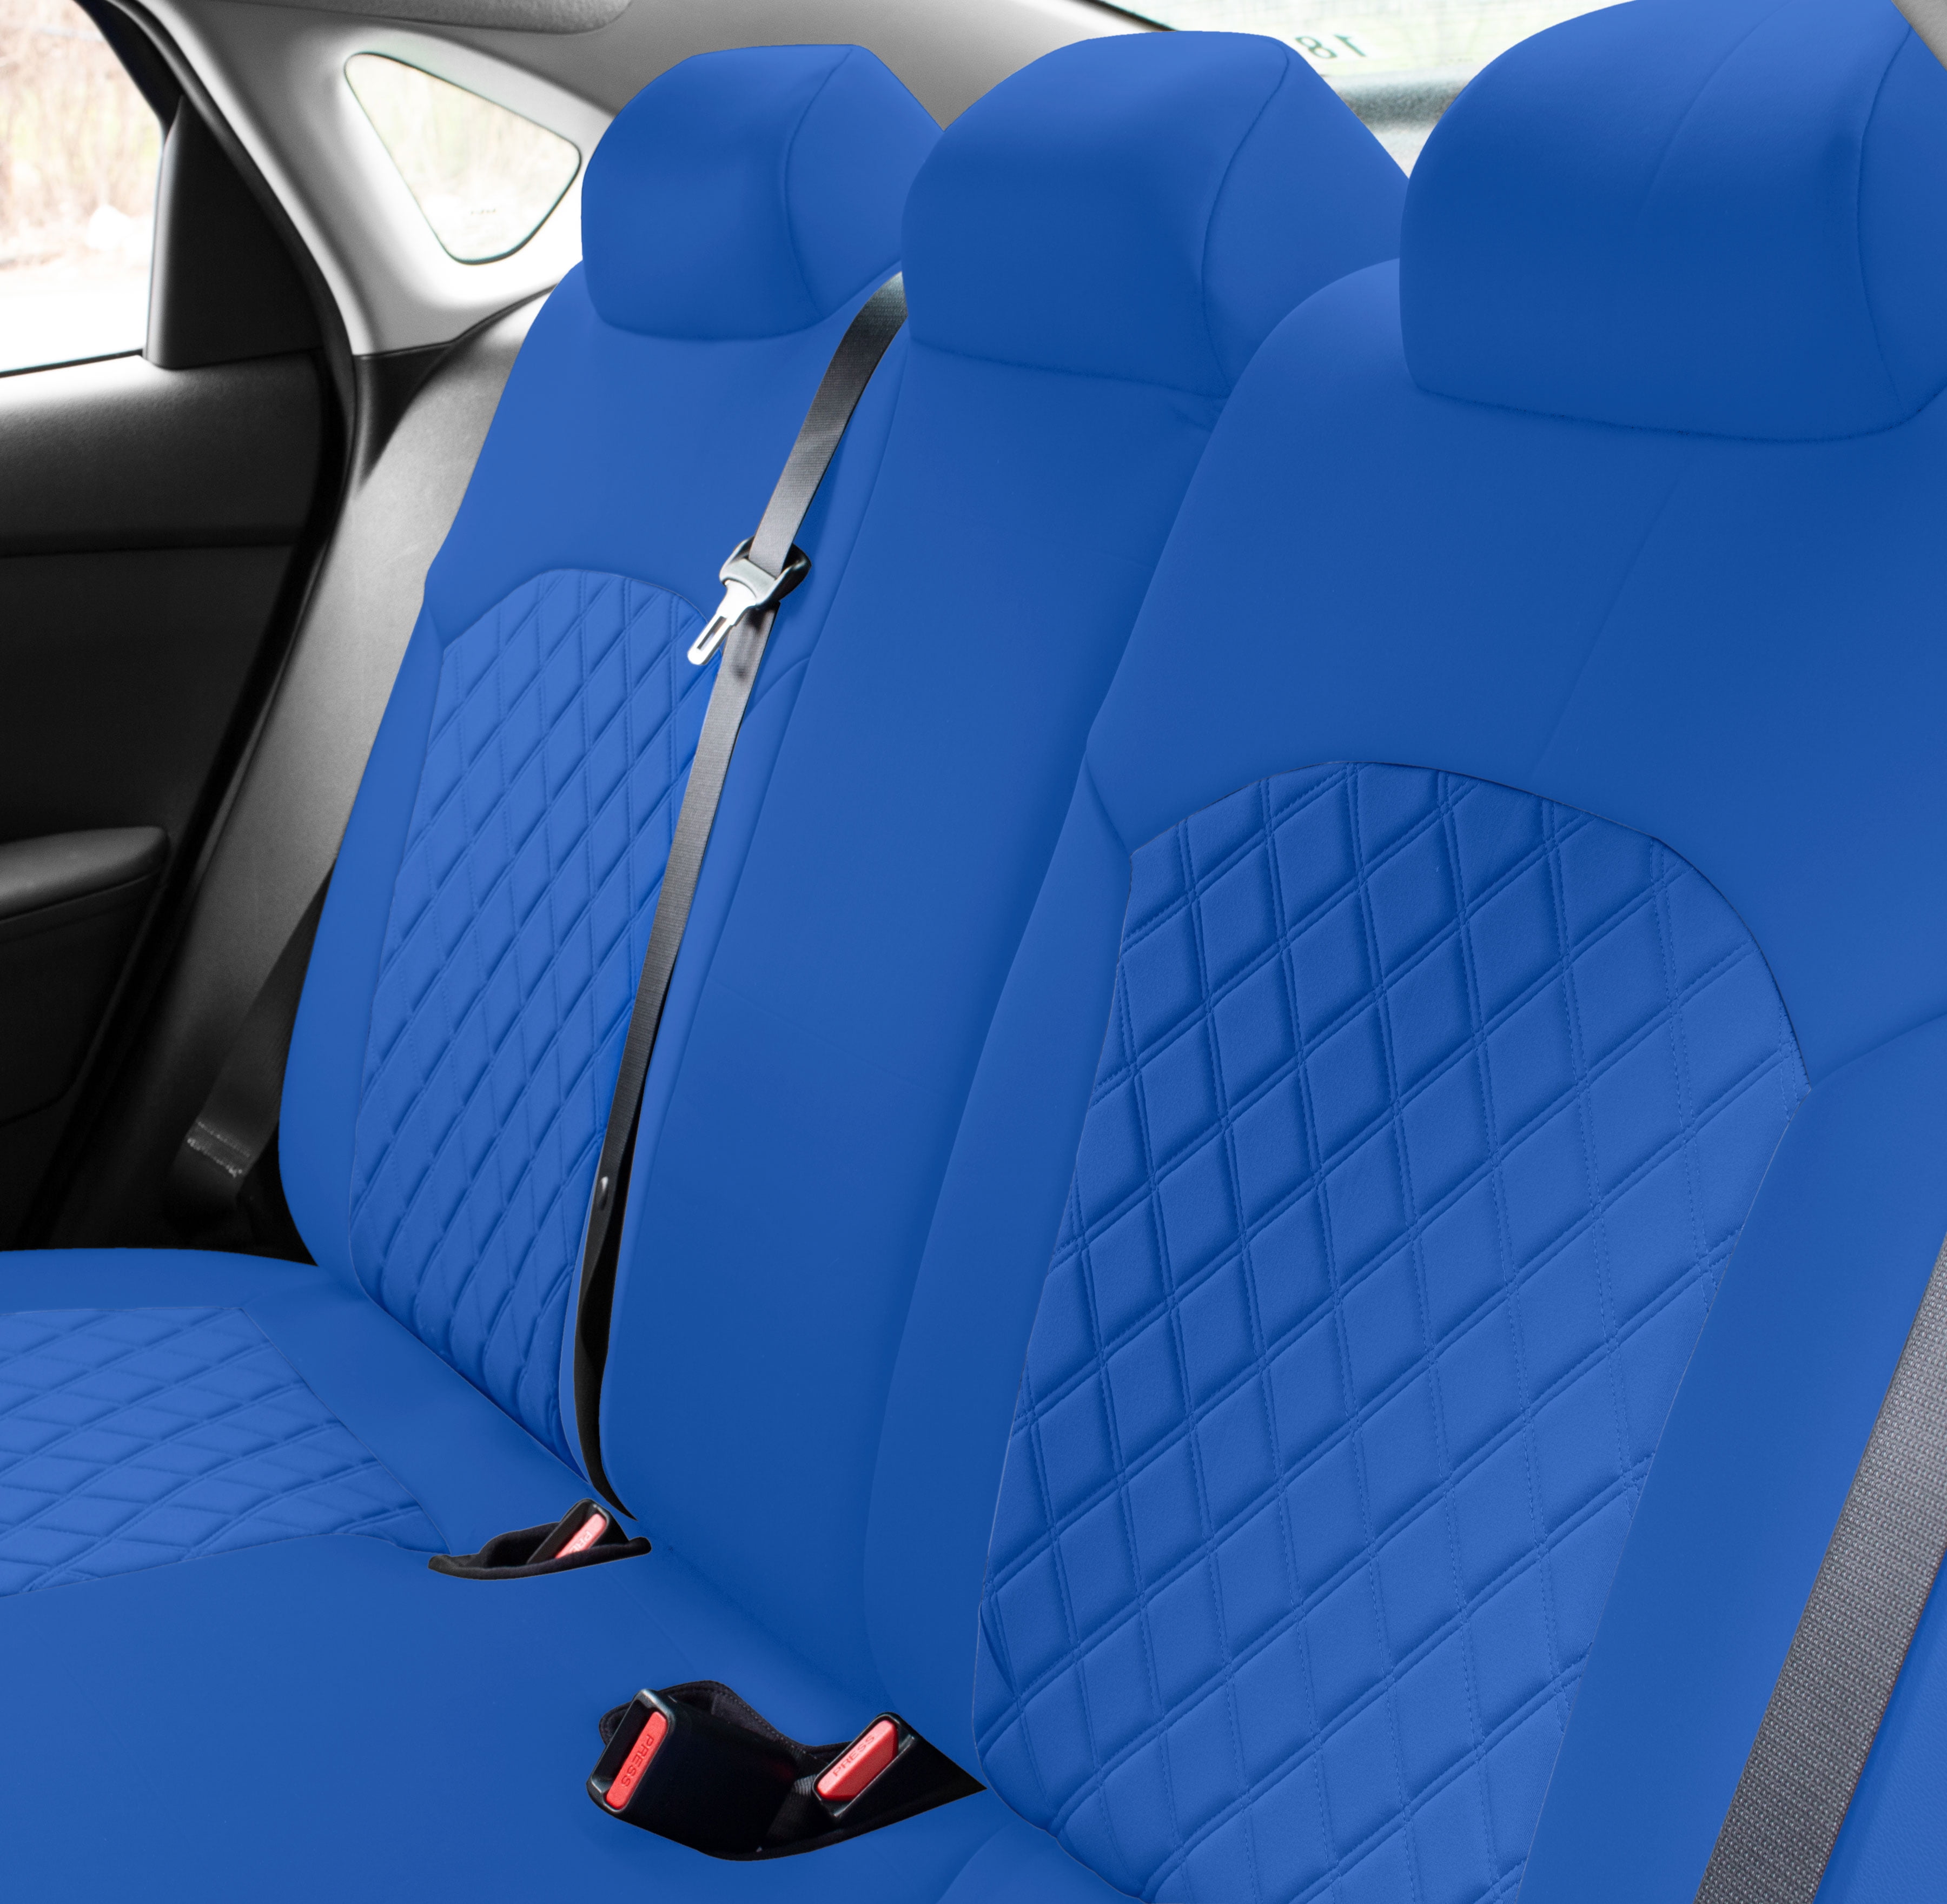  Car Cover for KIA/Cerato Forte Venga Kia Xceed,Breathable  Oxford Cloth Outdoor Full Outer Covers,Custom Car Cover Dustproof  Scratchproof Sun-Resistant (Color : Blue, Size : Venga) : Automotive